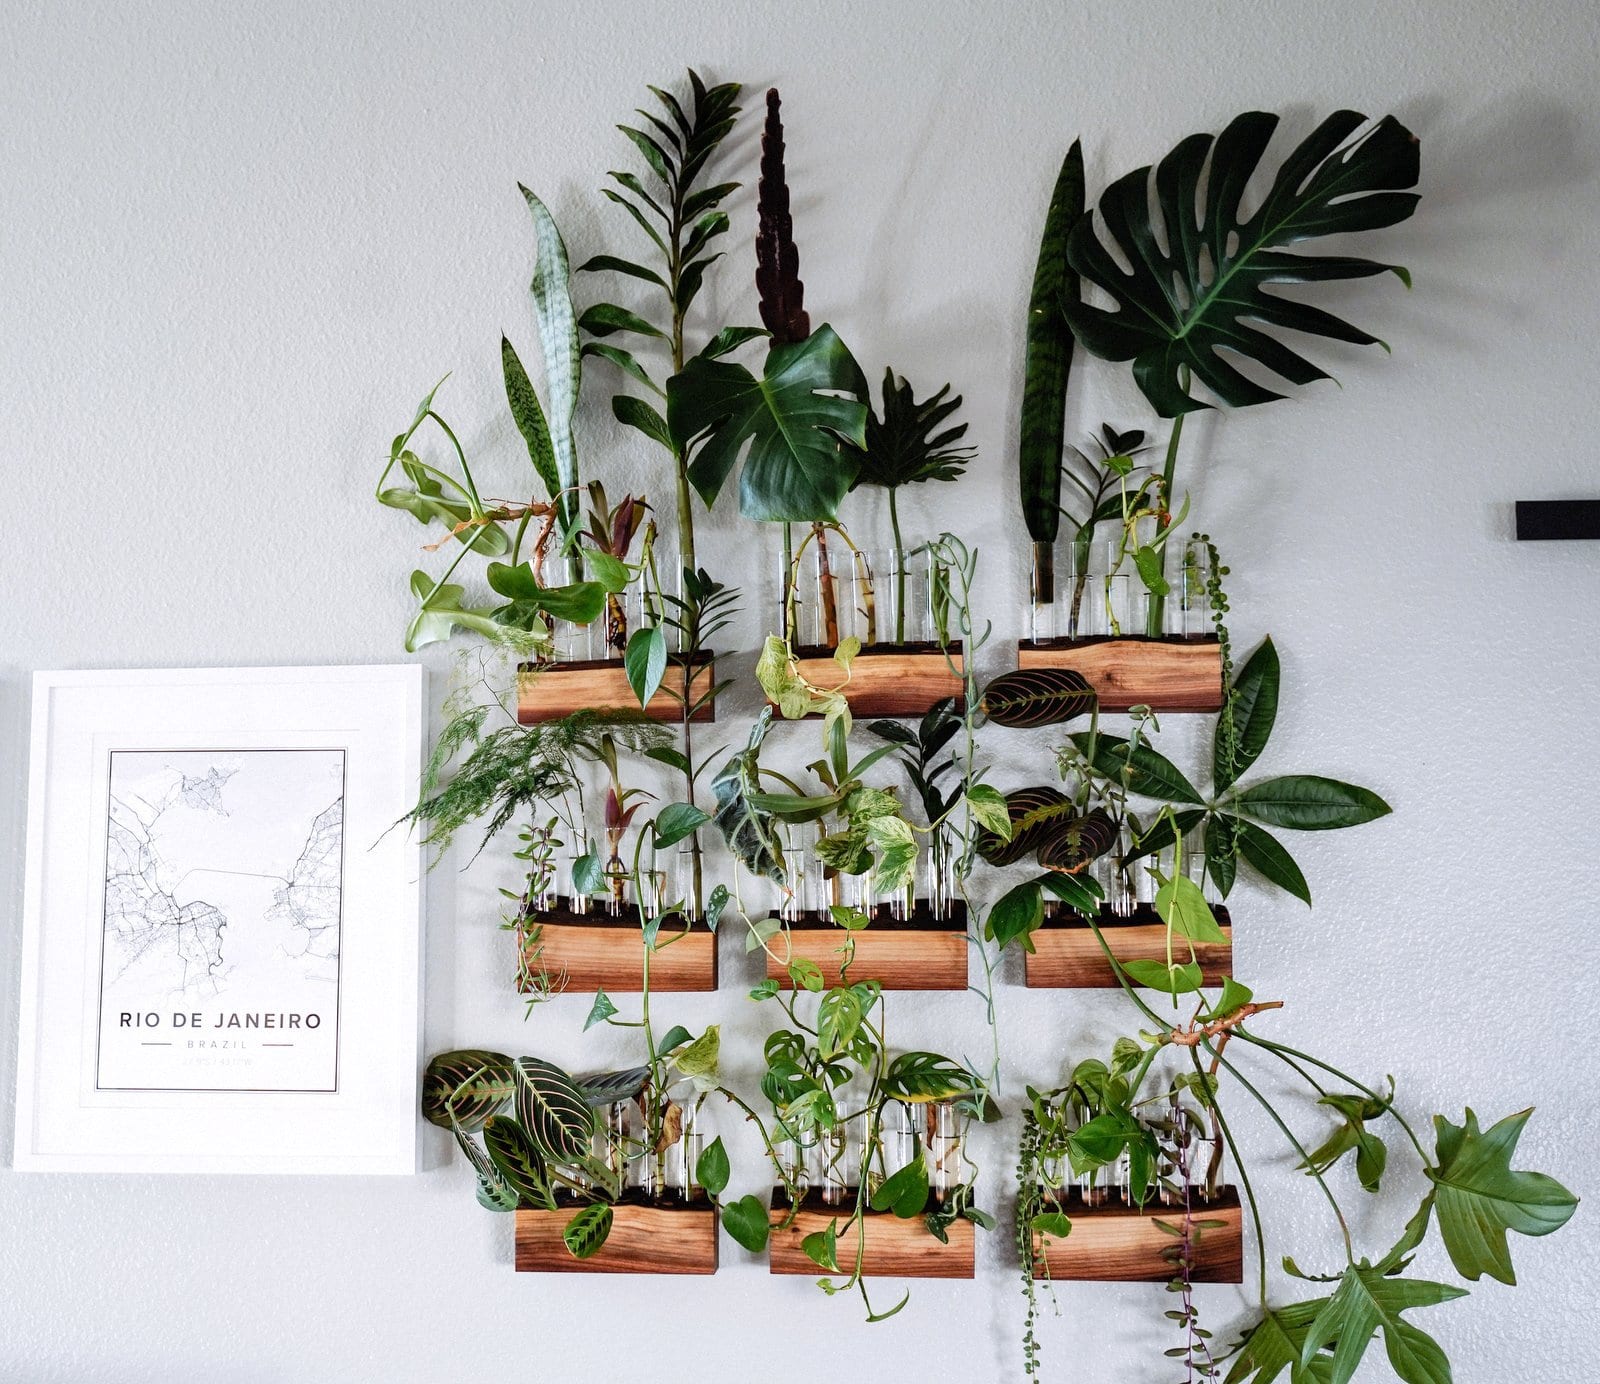 Indoor plants decorating: Propogating plants also makes beautiful wall decoration